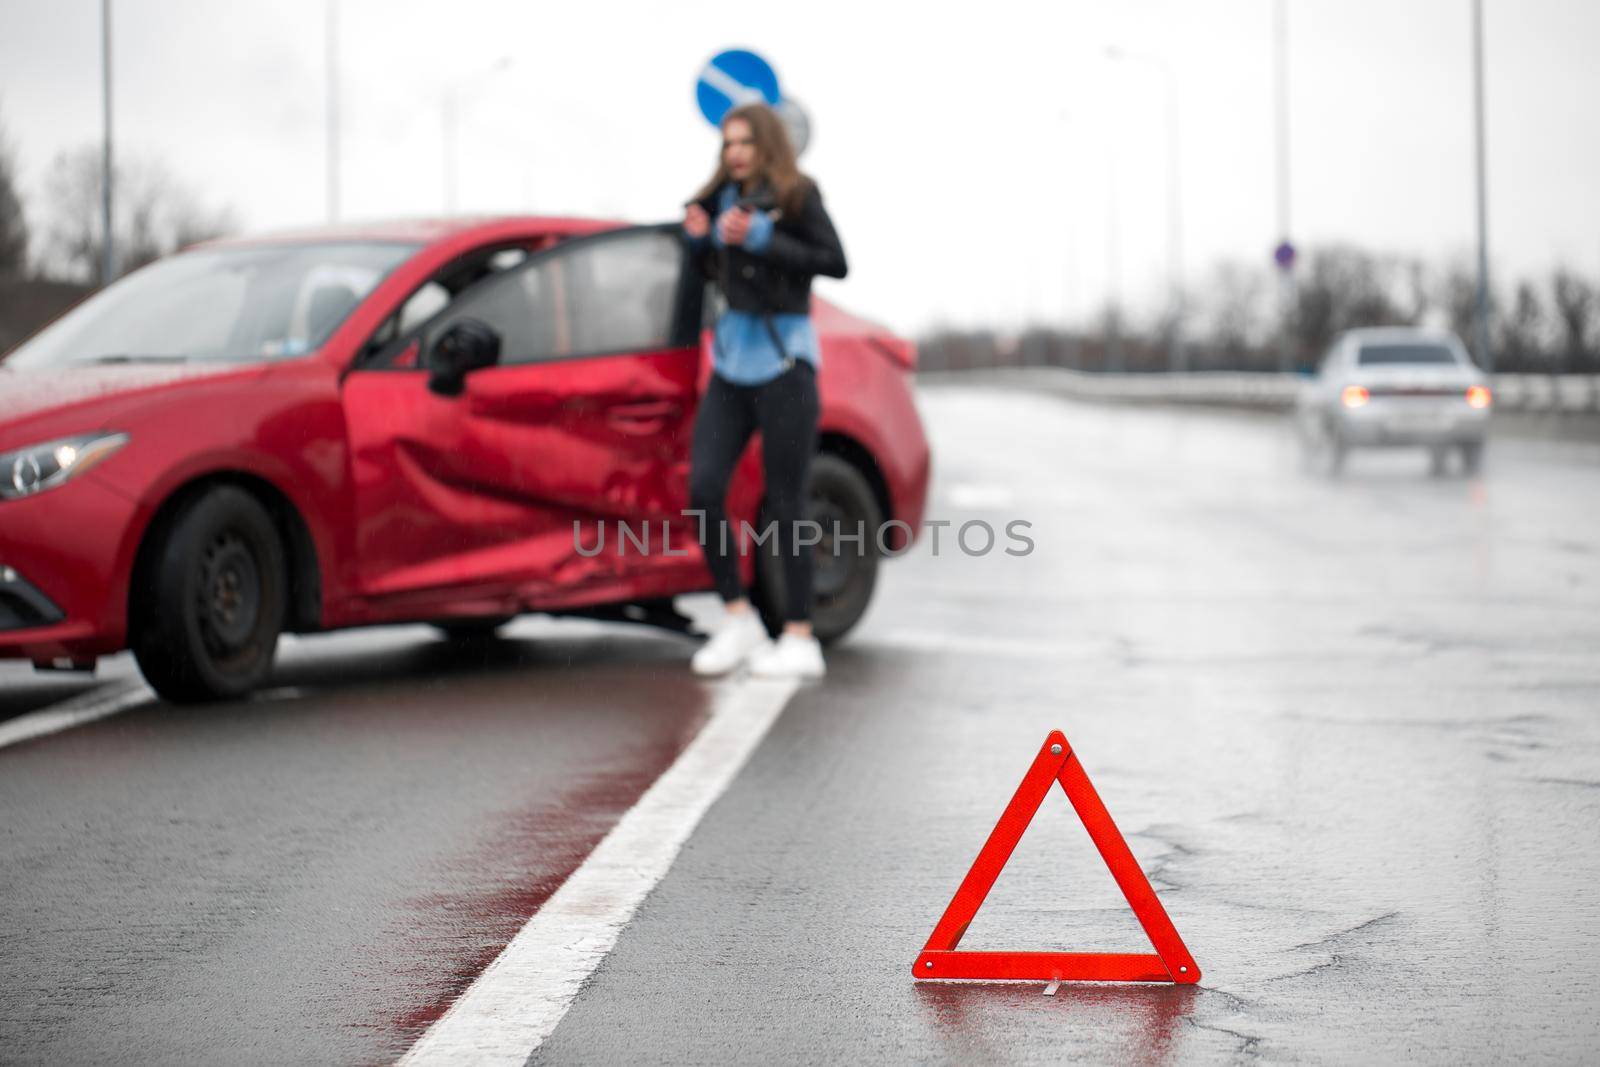 Driver sitting at roadside after traffic accident. Focus is on the red triangle sign. by StudioPeace